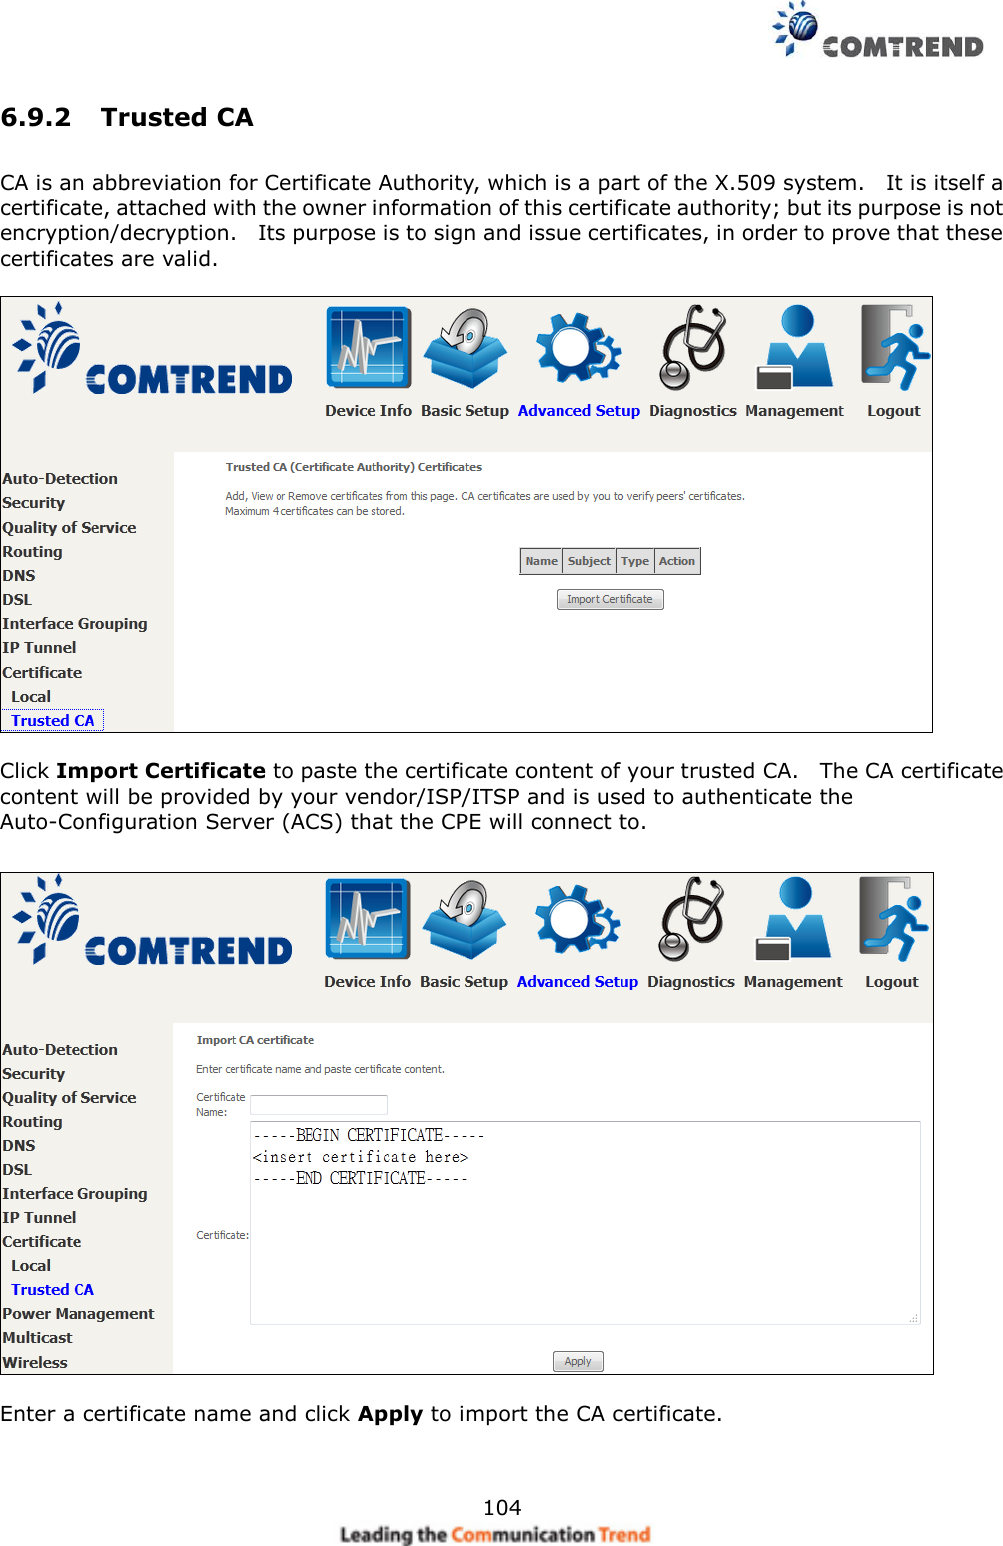     104 6.9.2  Trusted CA   CA is an abbreviation for Certificate Authority, which is a part of the X.509 system.    It is itself a certificate, attached with the owner information of this certificate authority; but its purpose is not encryption/decryption.    Its purpose is to sign and issue certificates, in order to prove that these certificates are valid.    Click Import Certificate to paste the certificate content of your trusted CA.    The CA certificate content will be provided by your vendor/ISP/ITSP and is used to authenticate the Auto-Configuration Server (ACS) that the CPE will connect to.    Enter a certificate name and click Apply to import the CA certificate. 